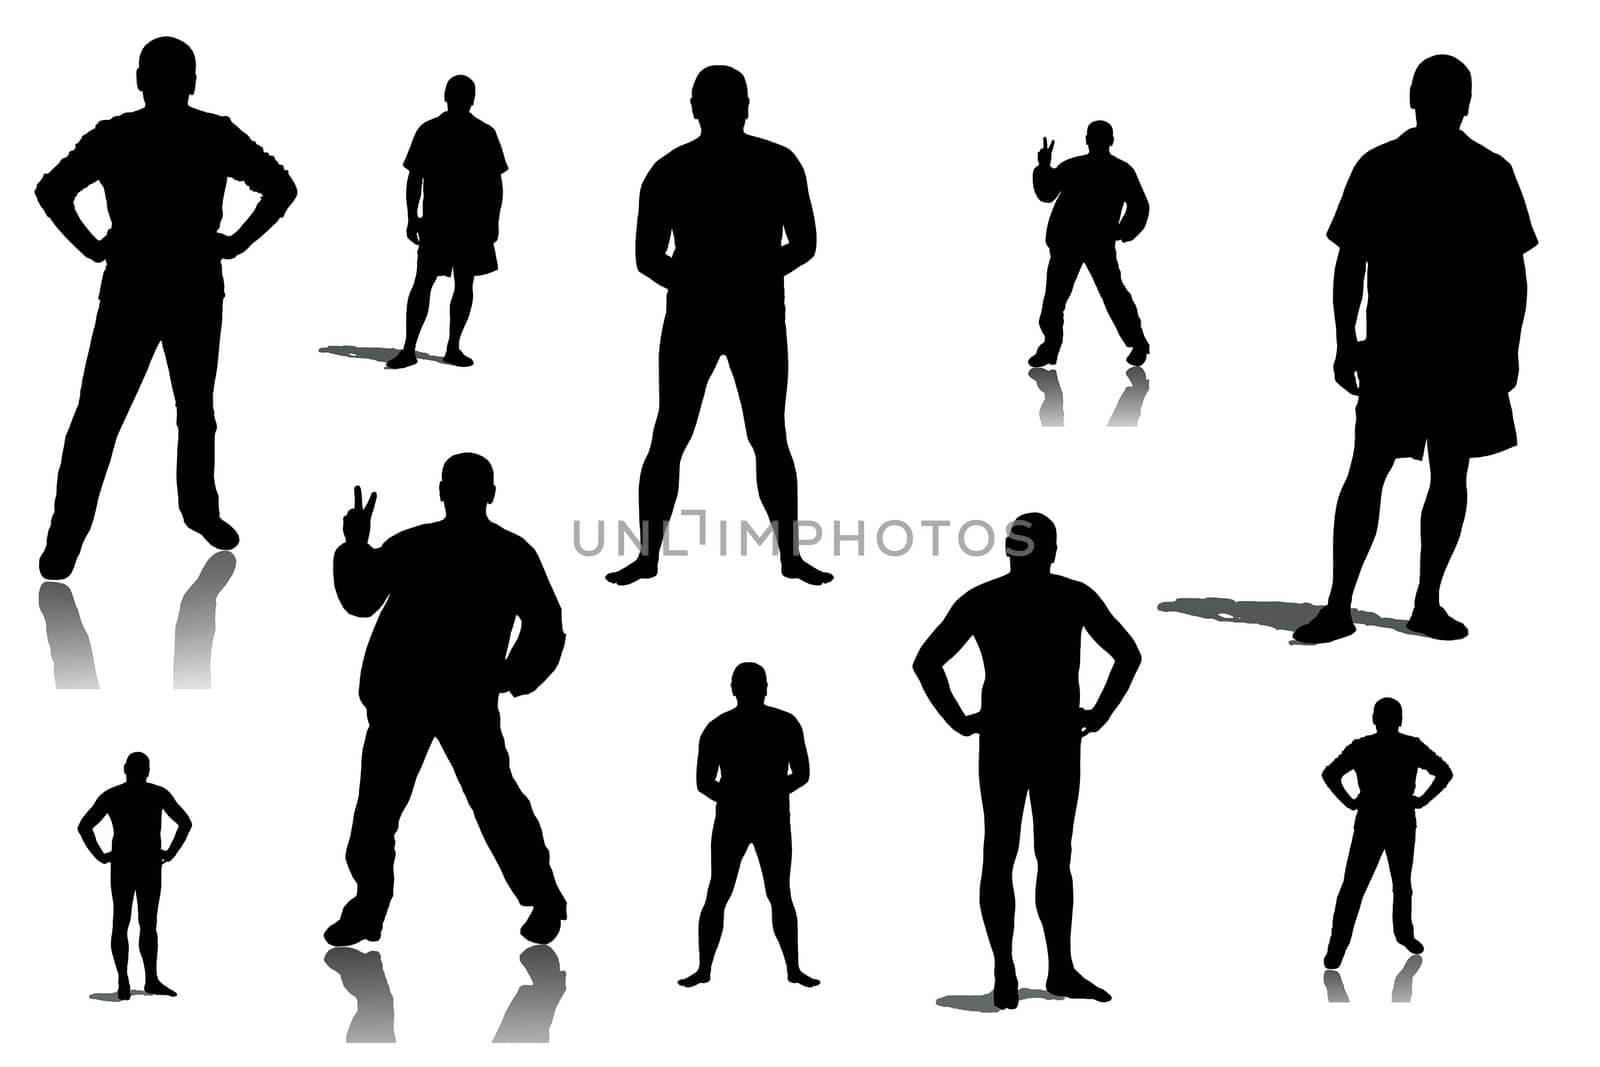 collage of silhouettes of men by zhannaprokopeva